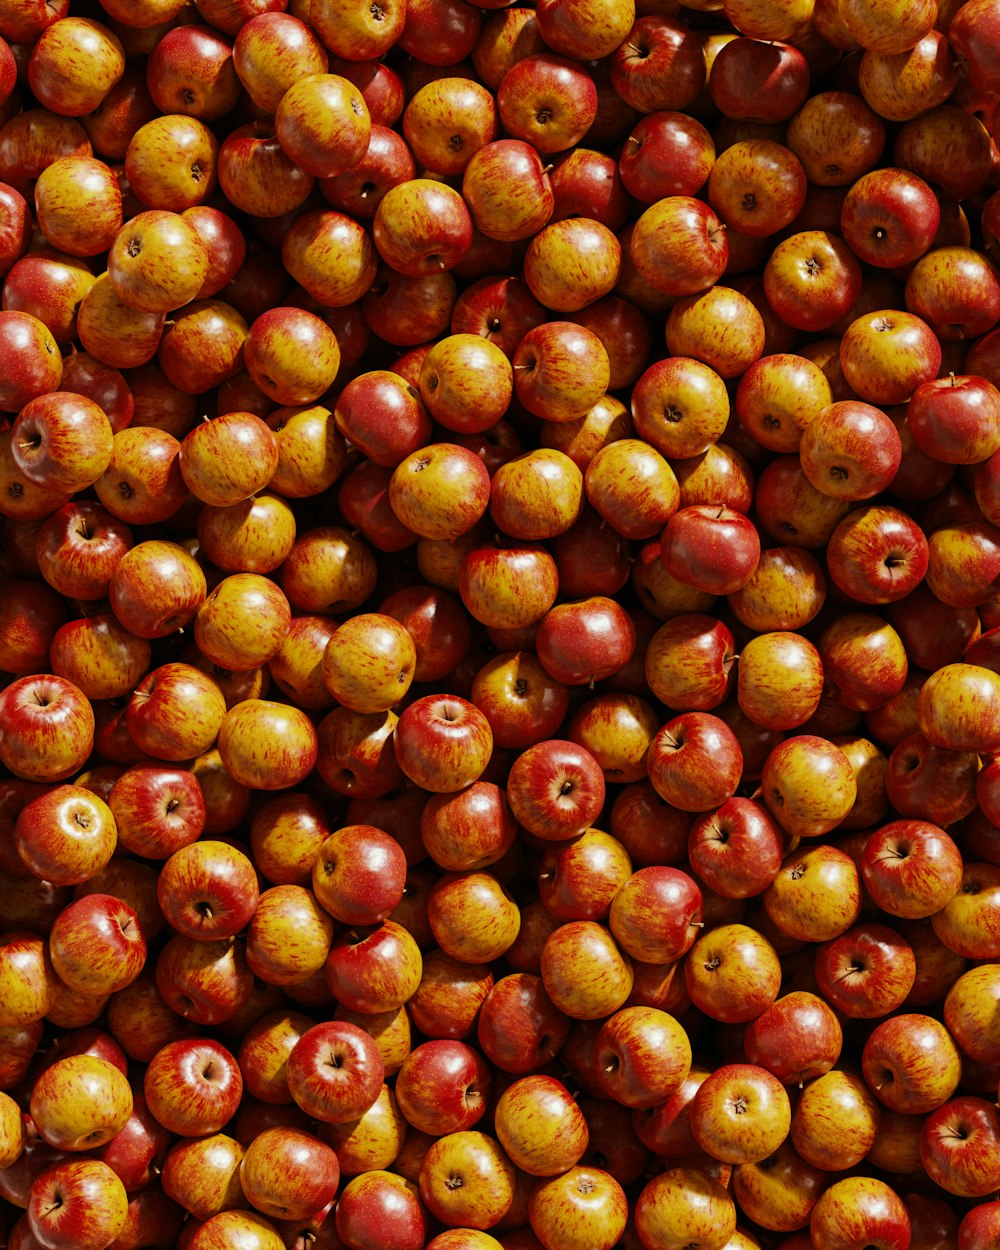 a large pile of red and yellow apples